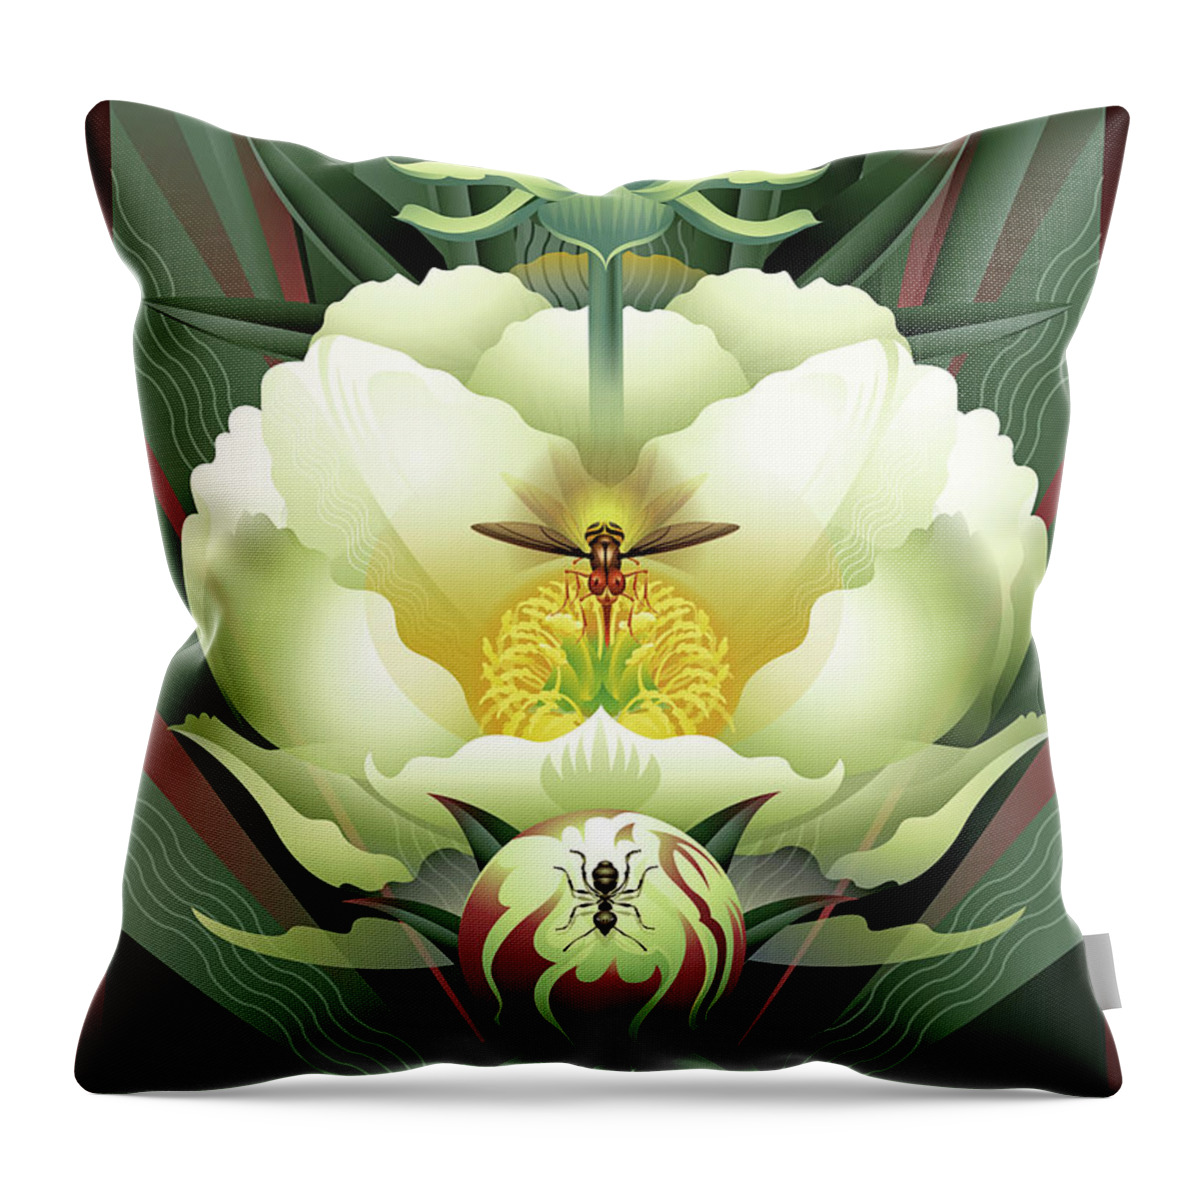 Ant Throw Pillow featuring the digital art Peony White Glory #1 by Garth Glazier